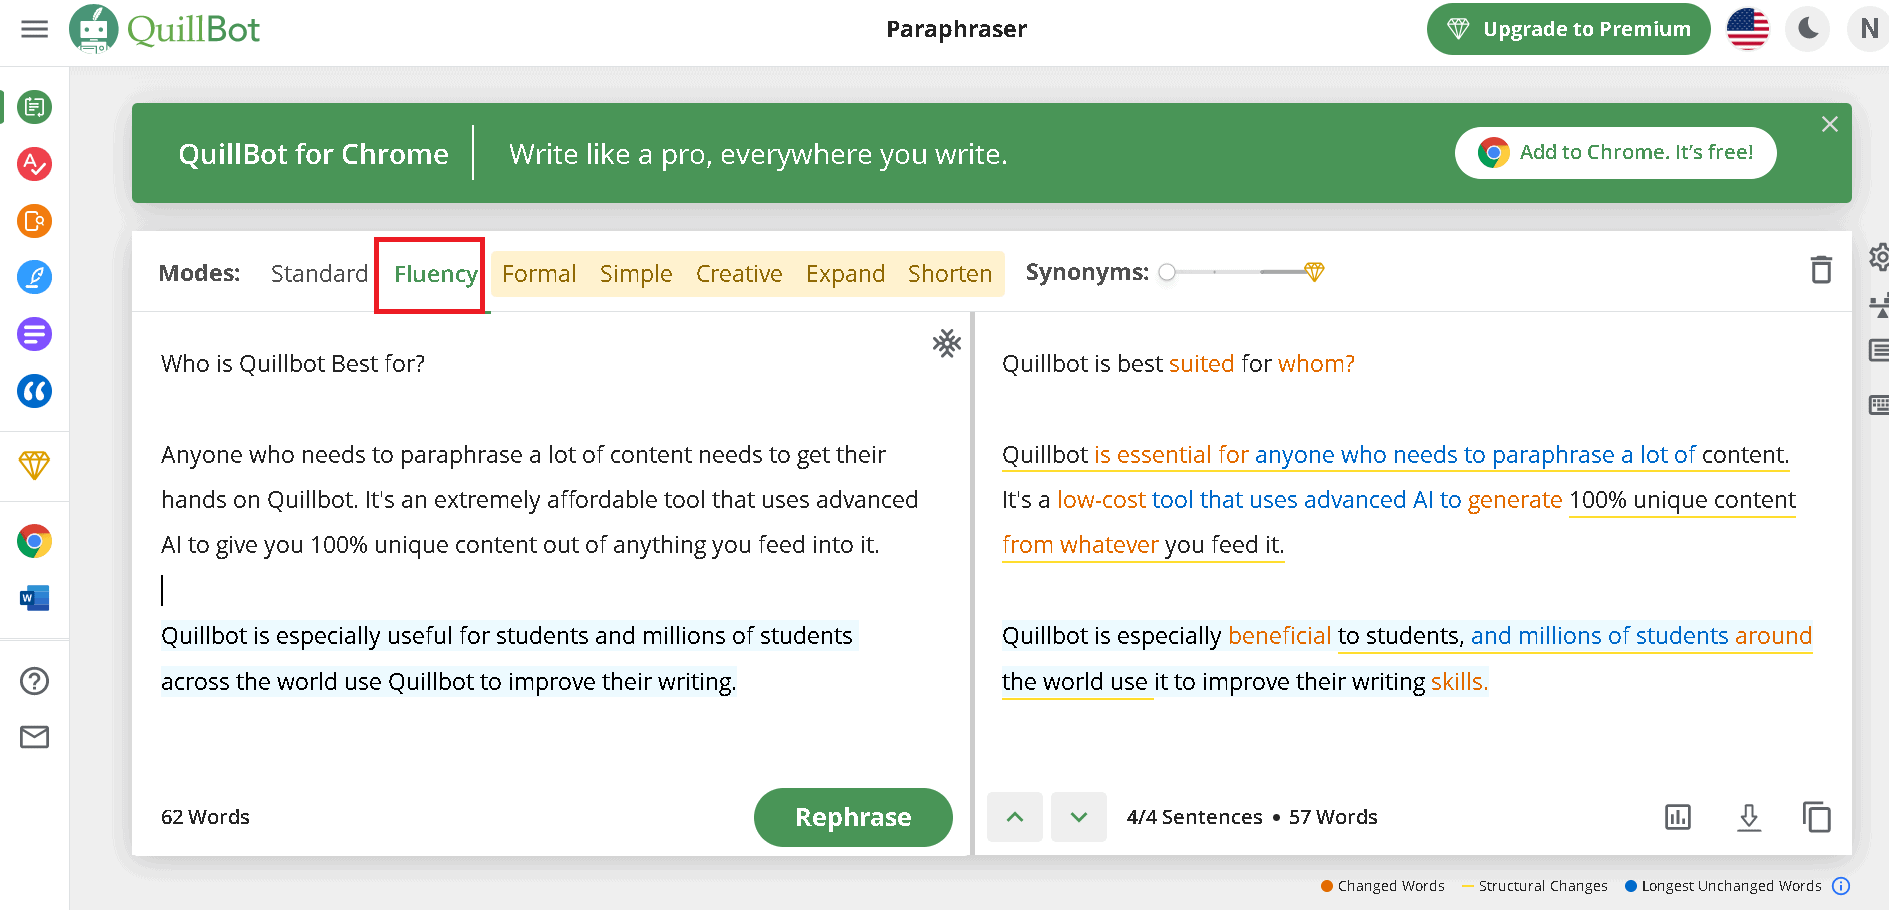 example of paraphrased paragraph with Quillbot's Fluency mode